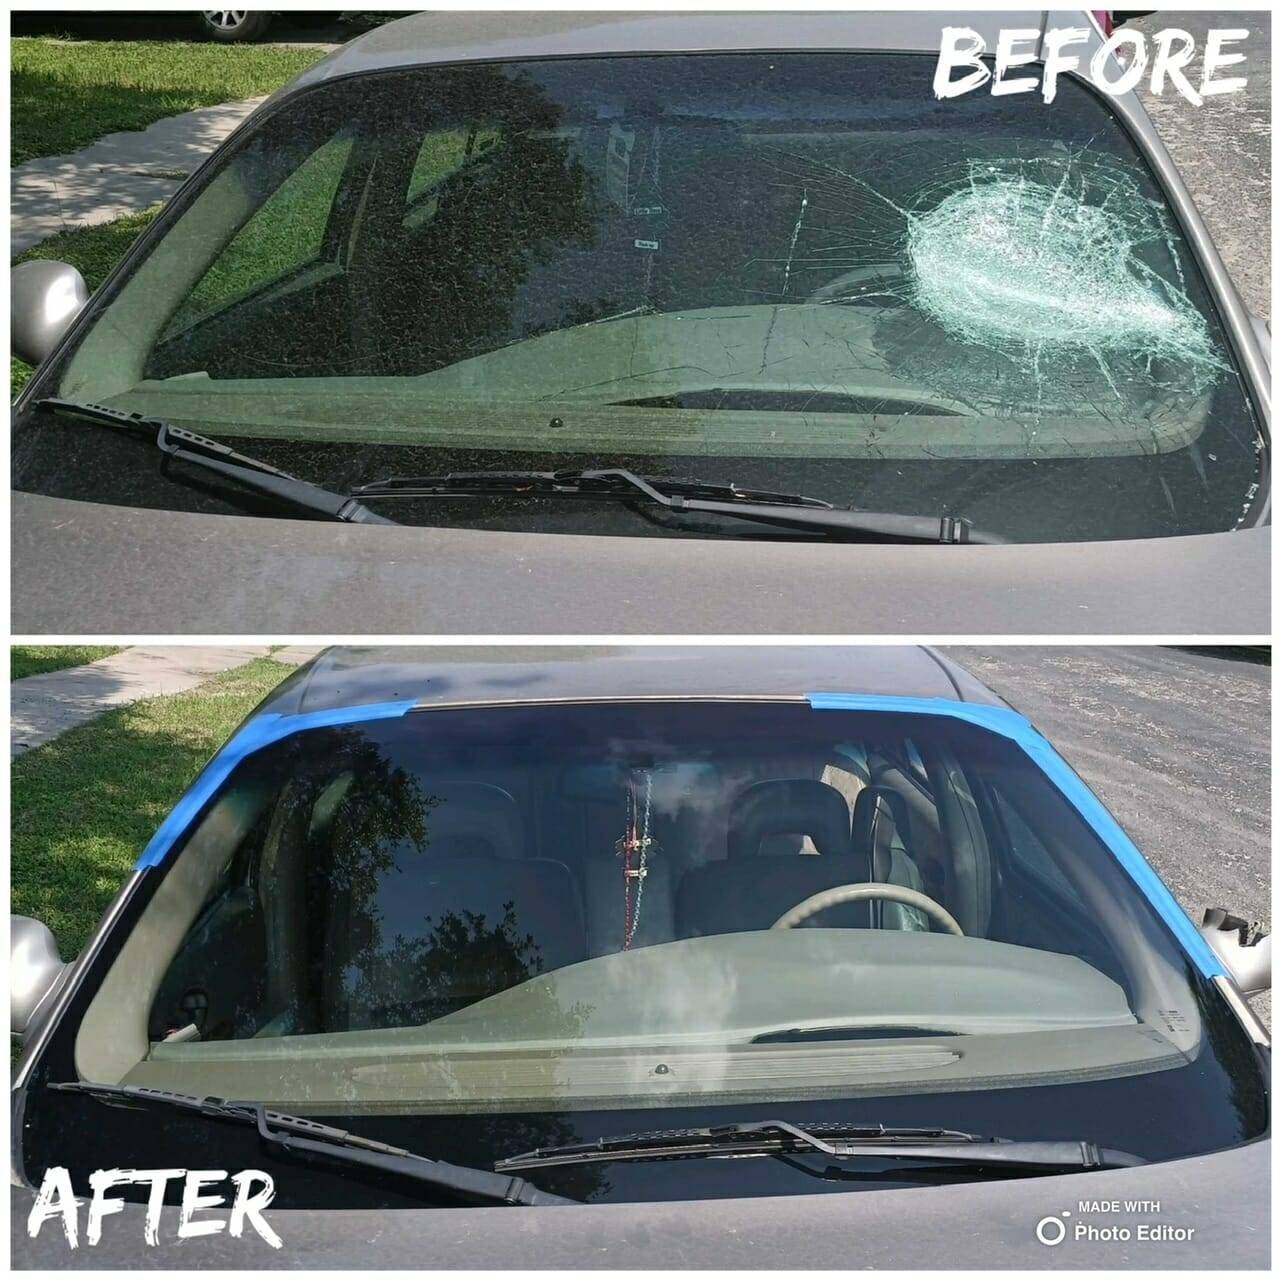 This before and after image highlights the repair of a car's front windshield in Kirby, Texas. The top half features a smashed windshield on the driver side, caused by a large rock due to vandalism. The bottom half presents the car after the repair, with a new, clear, and intact front windshield installed, showcasing the effectiveness of our windshield replacement service.